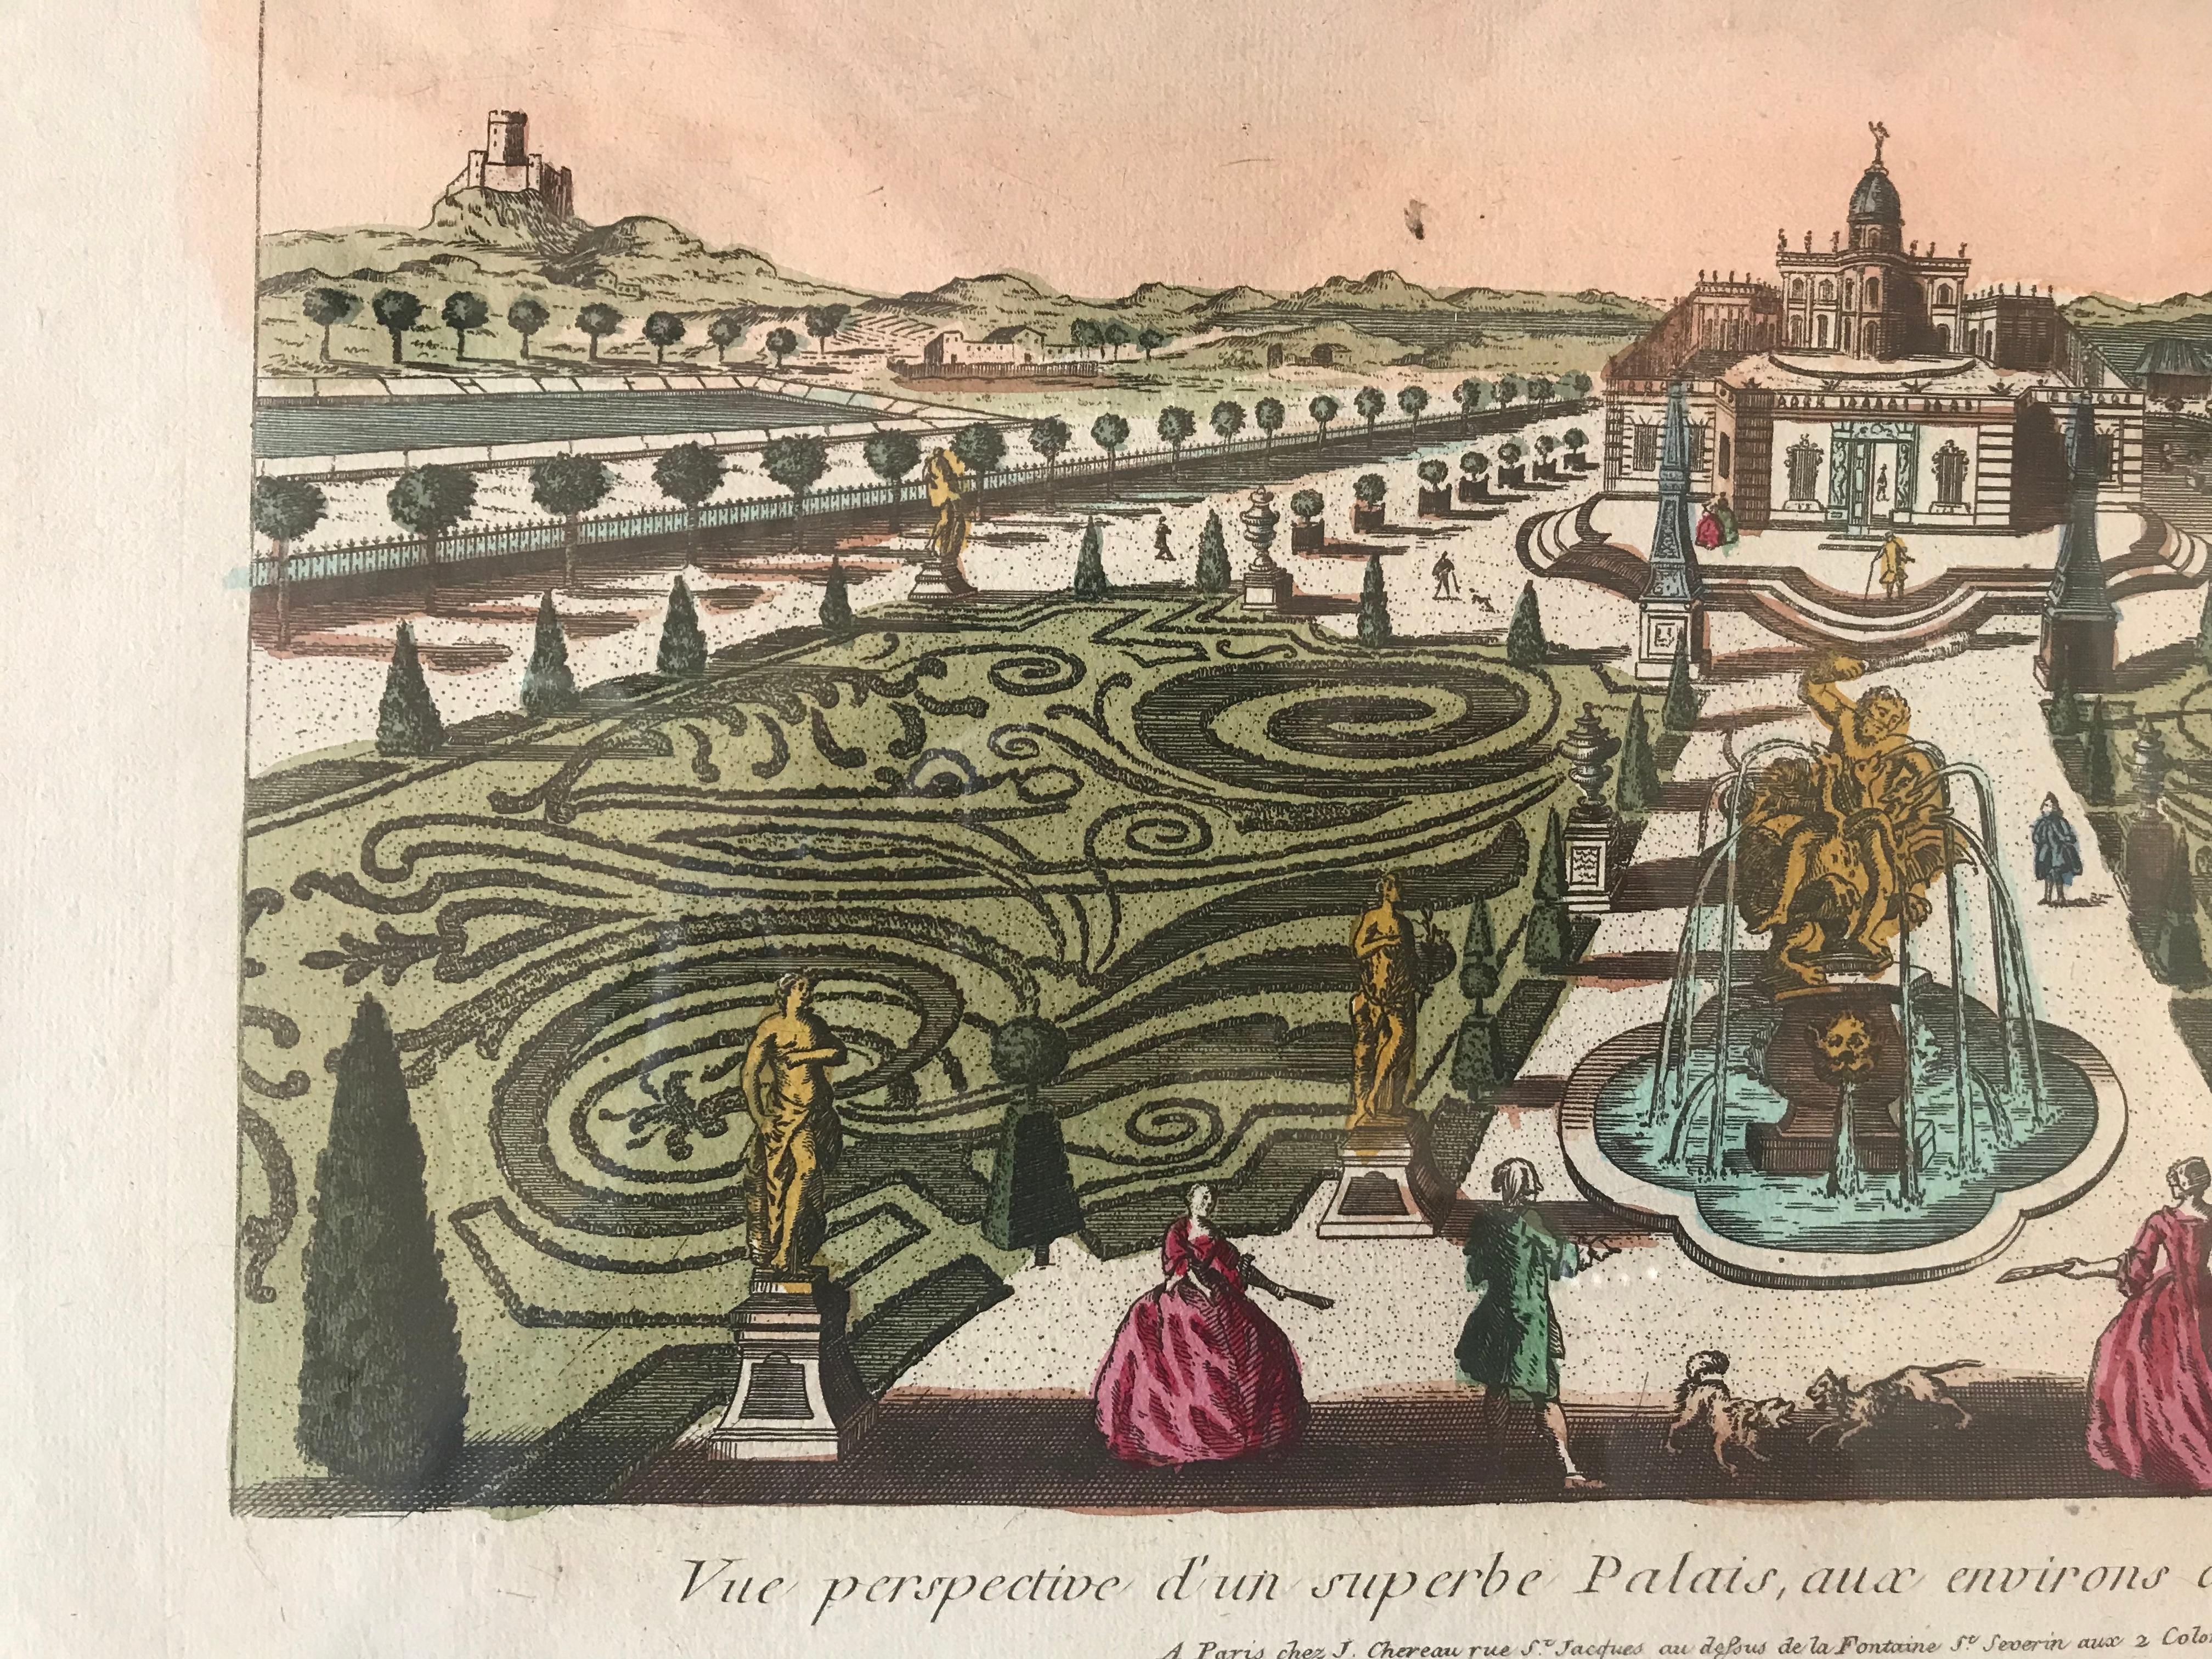 18th century Vue d’Optique hand-colored engraving of a Spanish palace, Madrid.
Custom frame.